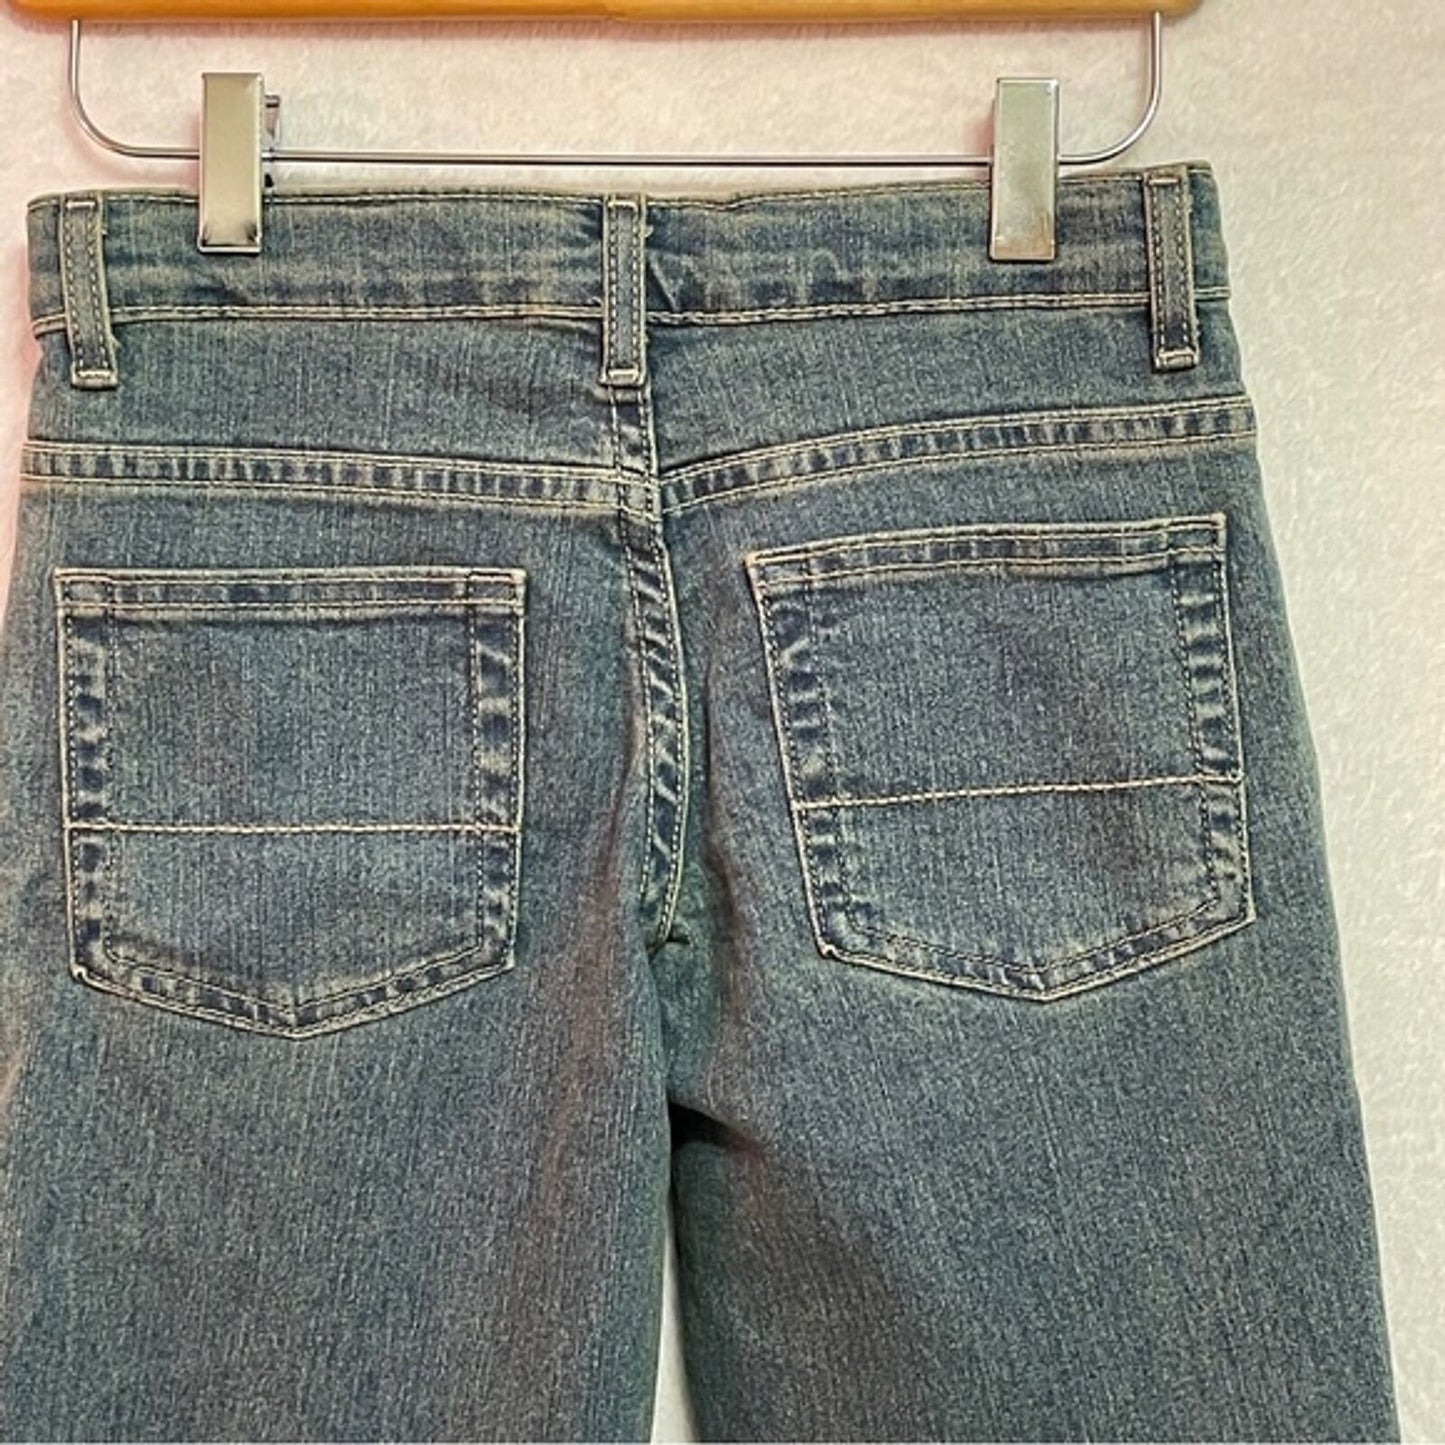 Urban Pipeline Boys Ultimate Jeans Faded Wash Jeans Size 8